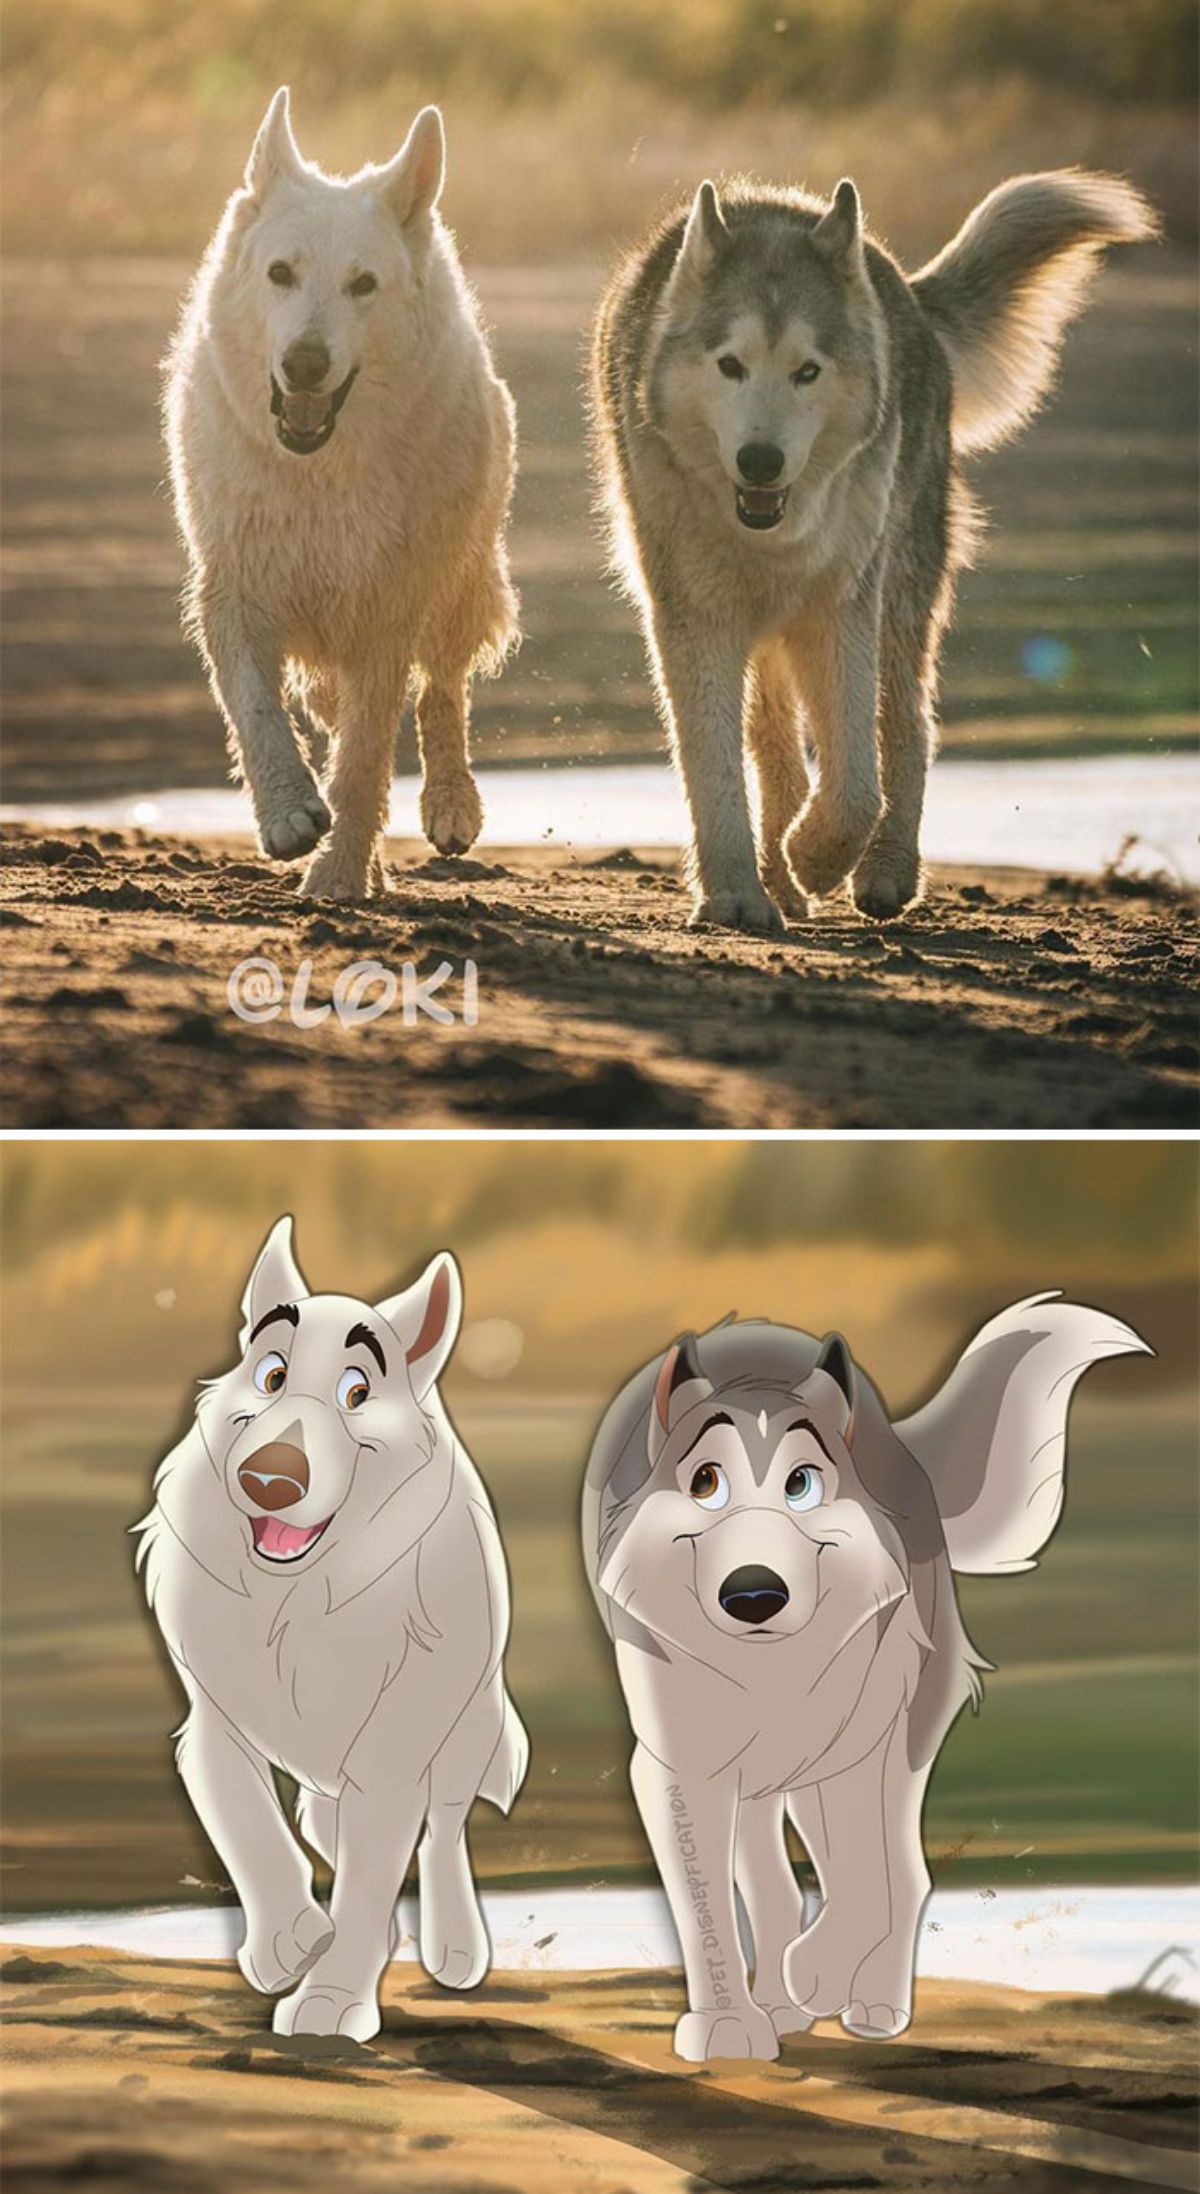 real photo and cartoon image of a white husky and grey and white husky running together